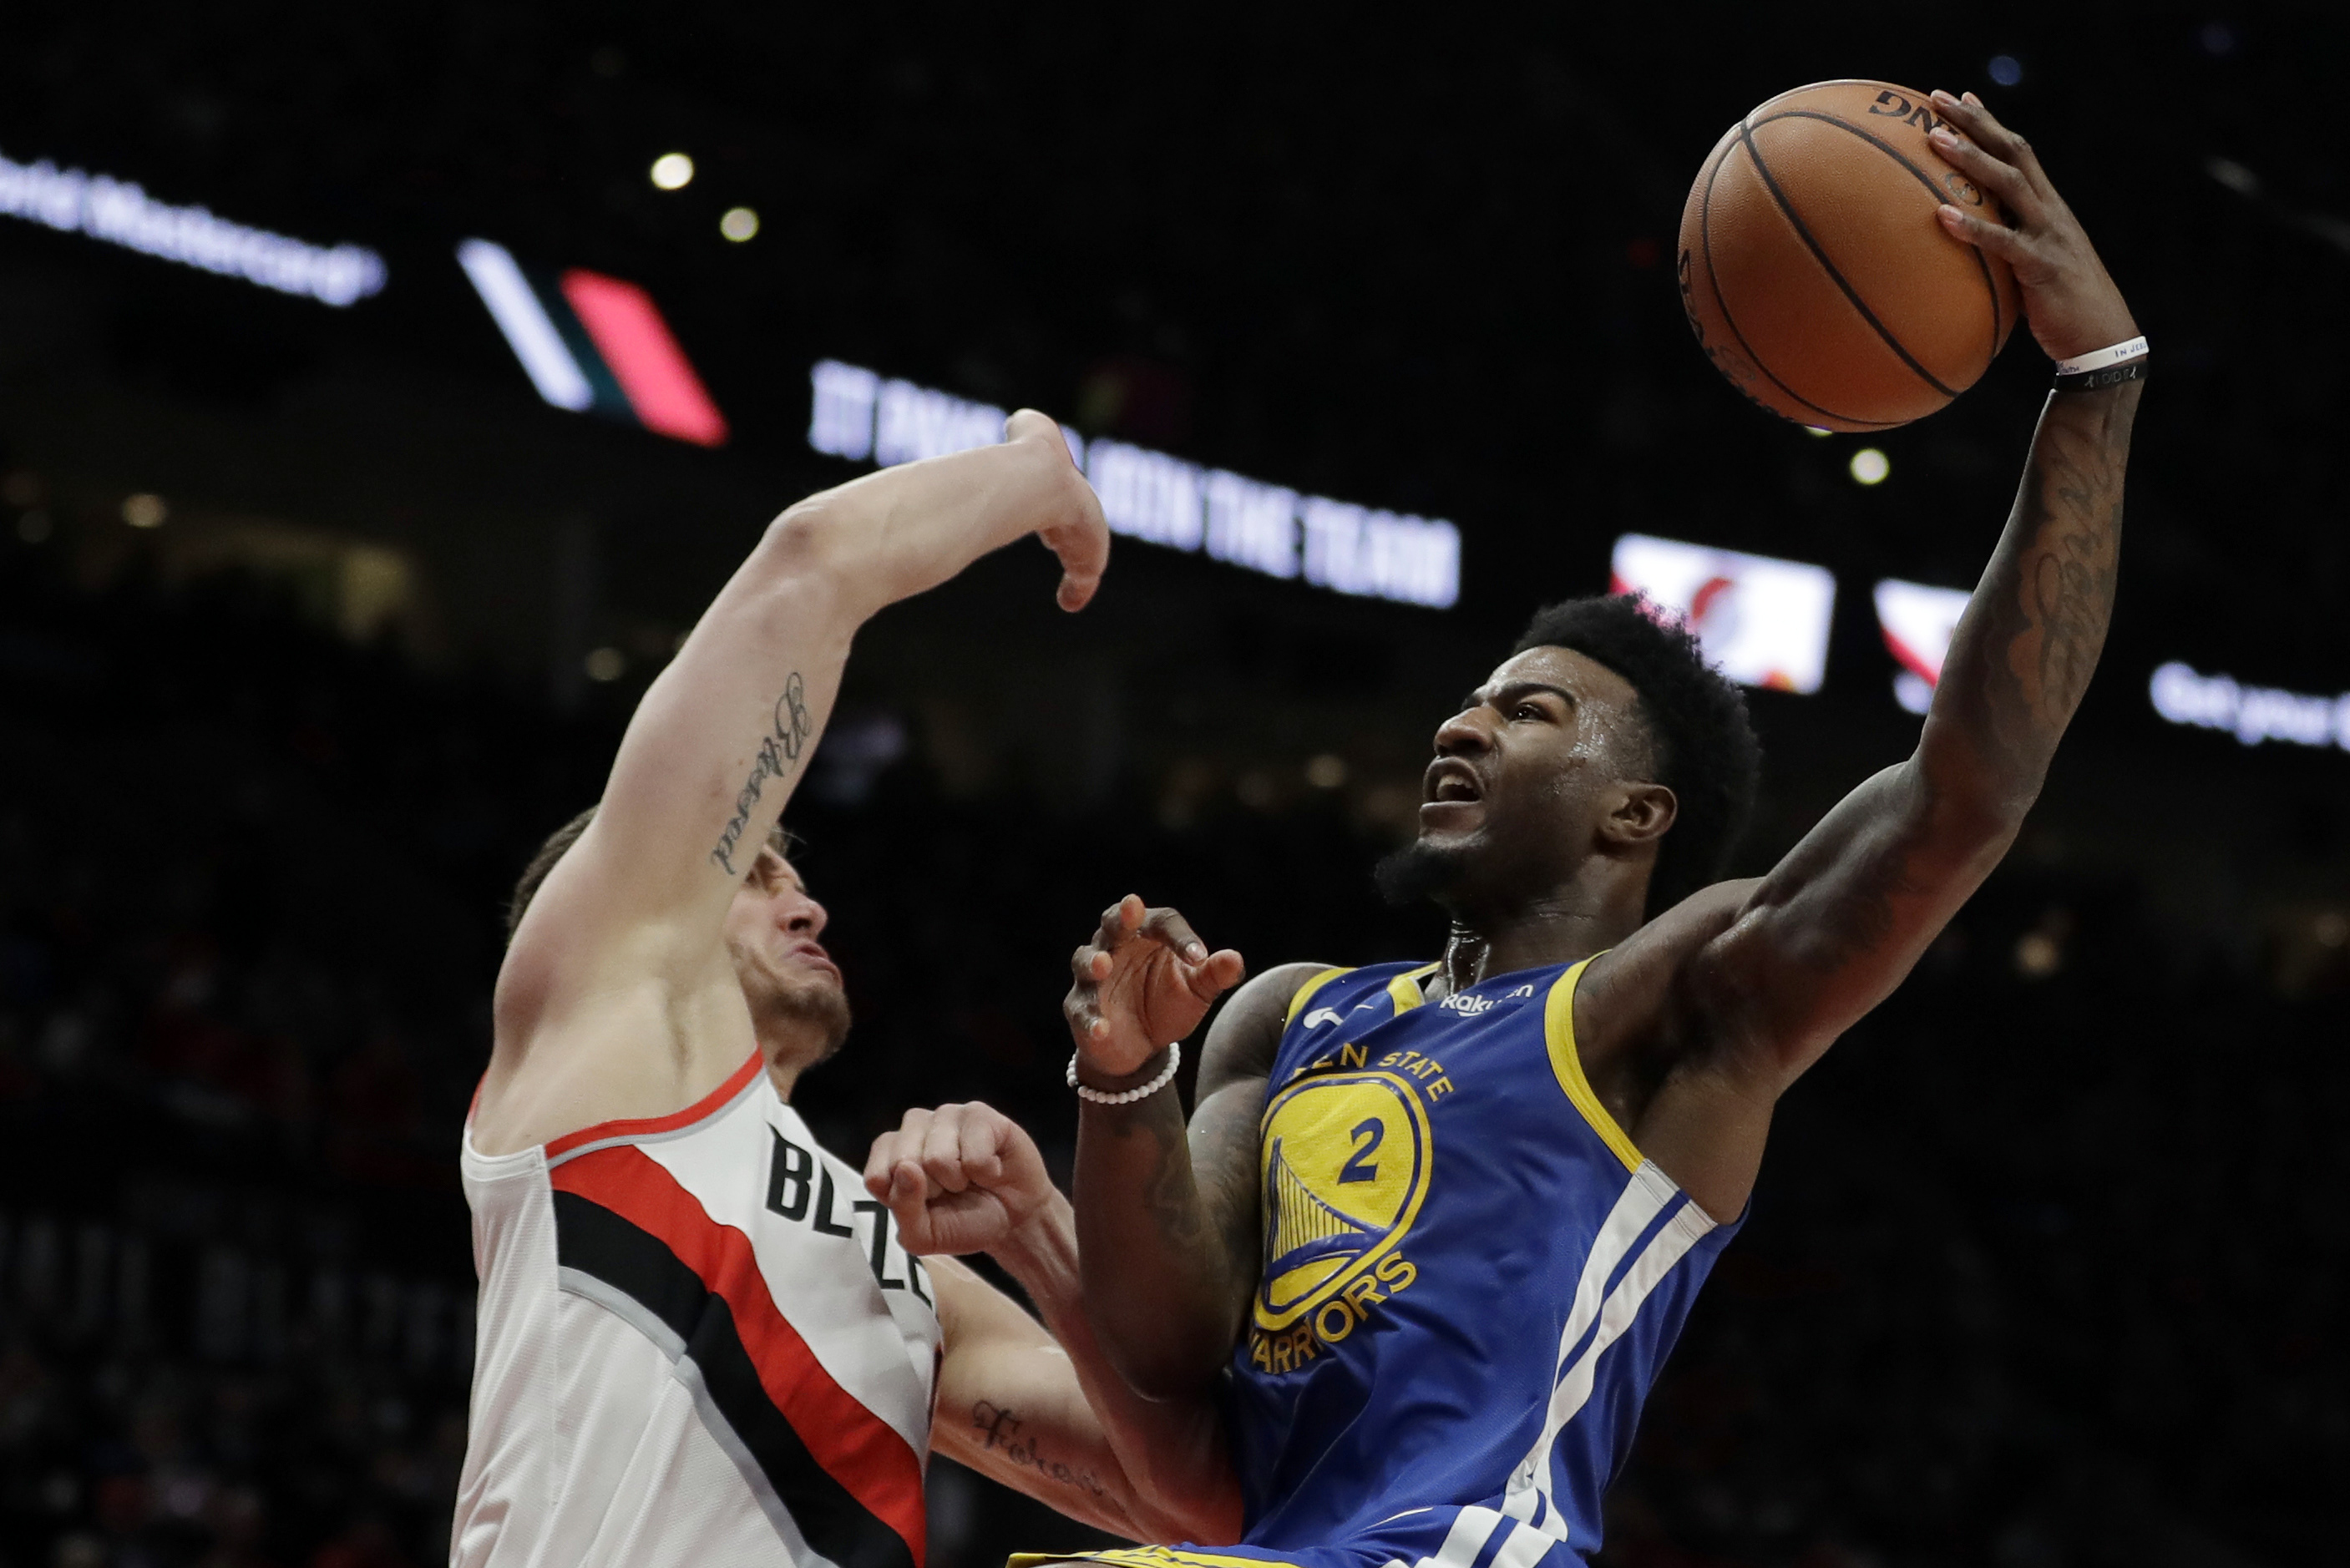 Nba Playoff Schedule 2019 Tv Coverage And Live Stream For Finals Bleacher Report Latest News Videos And Highlights